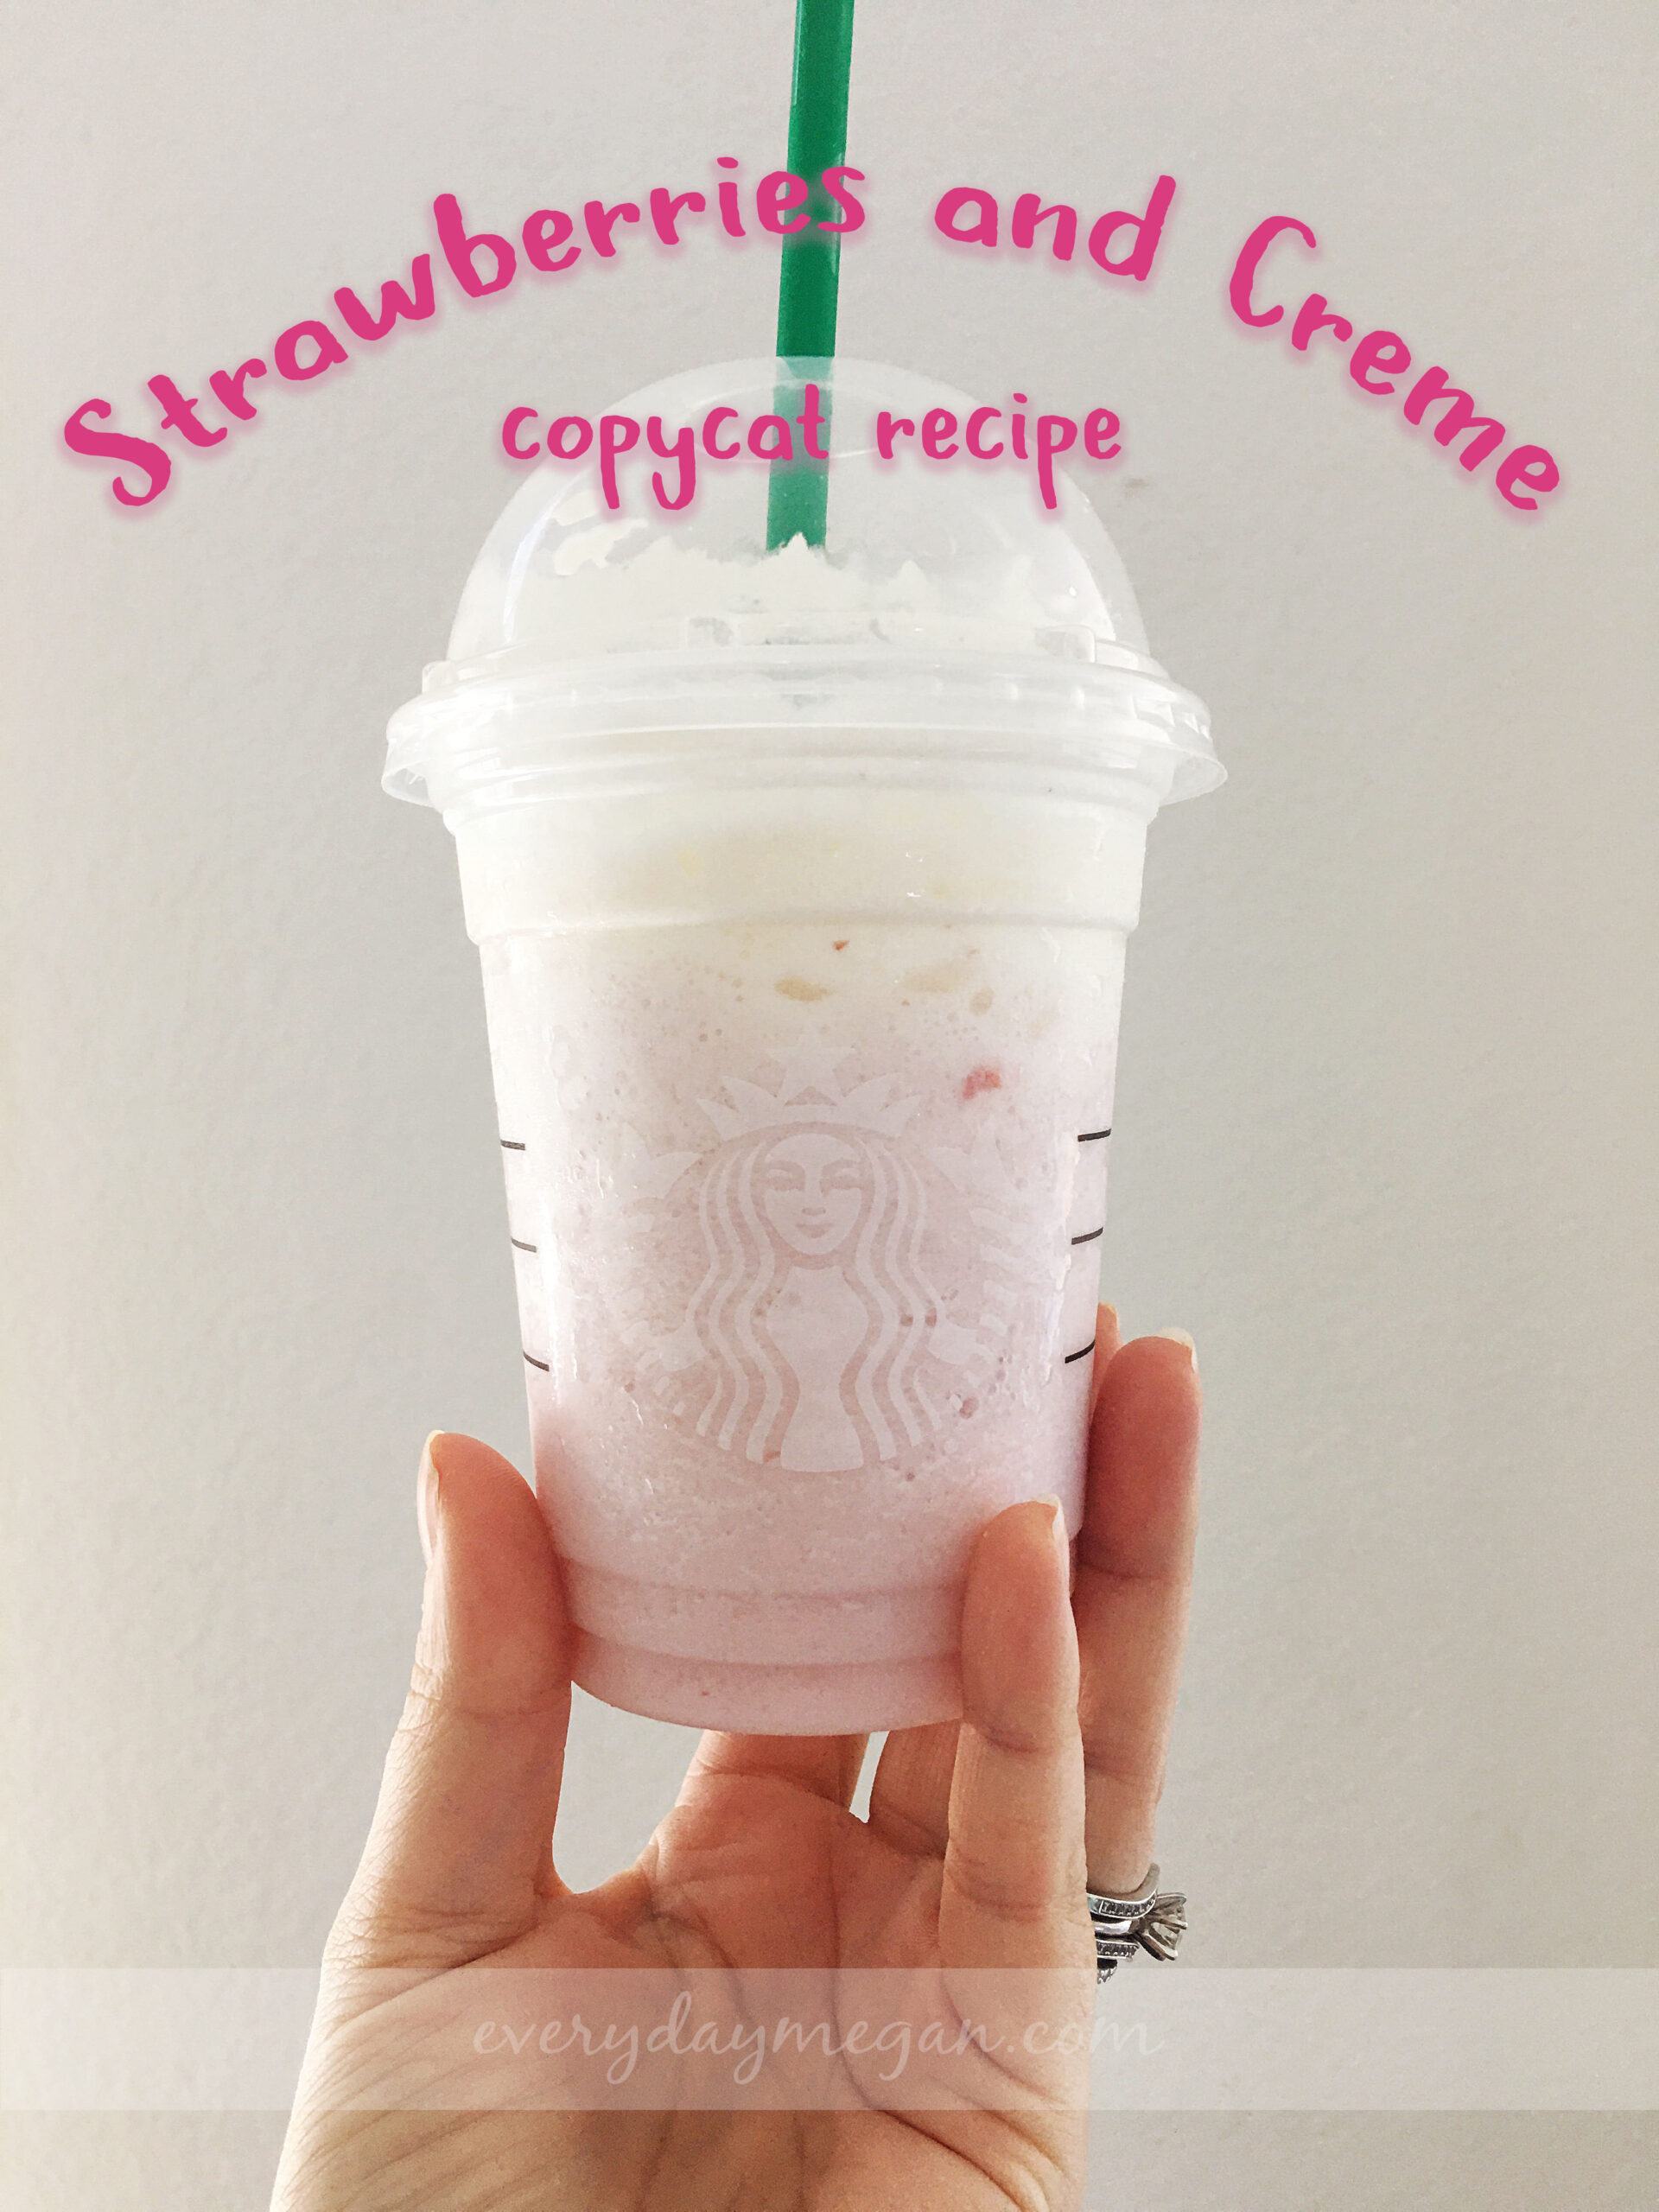 With the help of a few simple ingredients, make a yummy Strawberries and Creme Frappaccino at home!